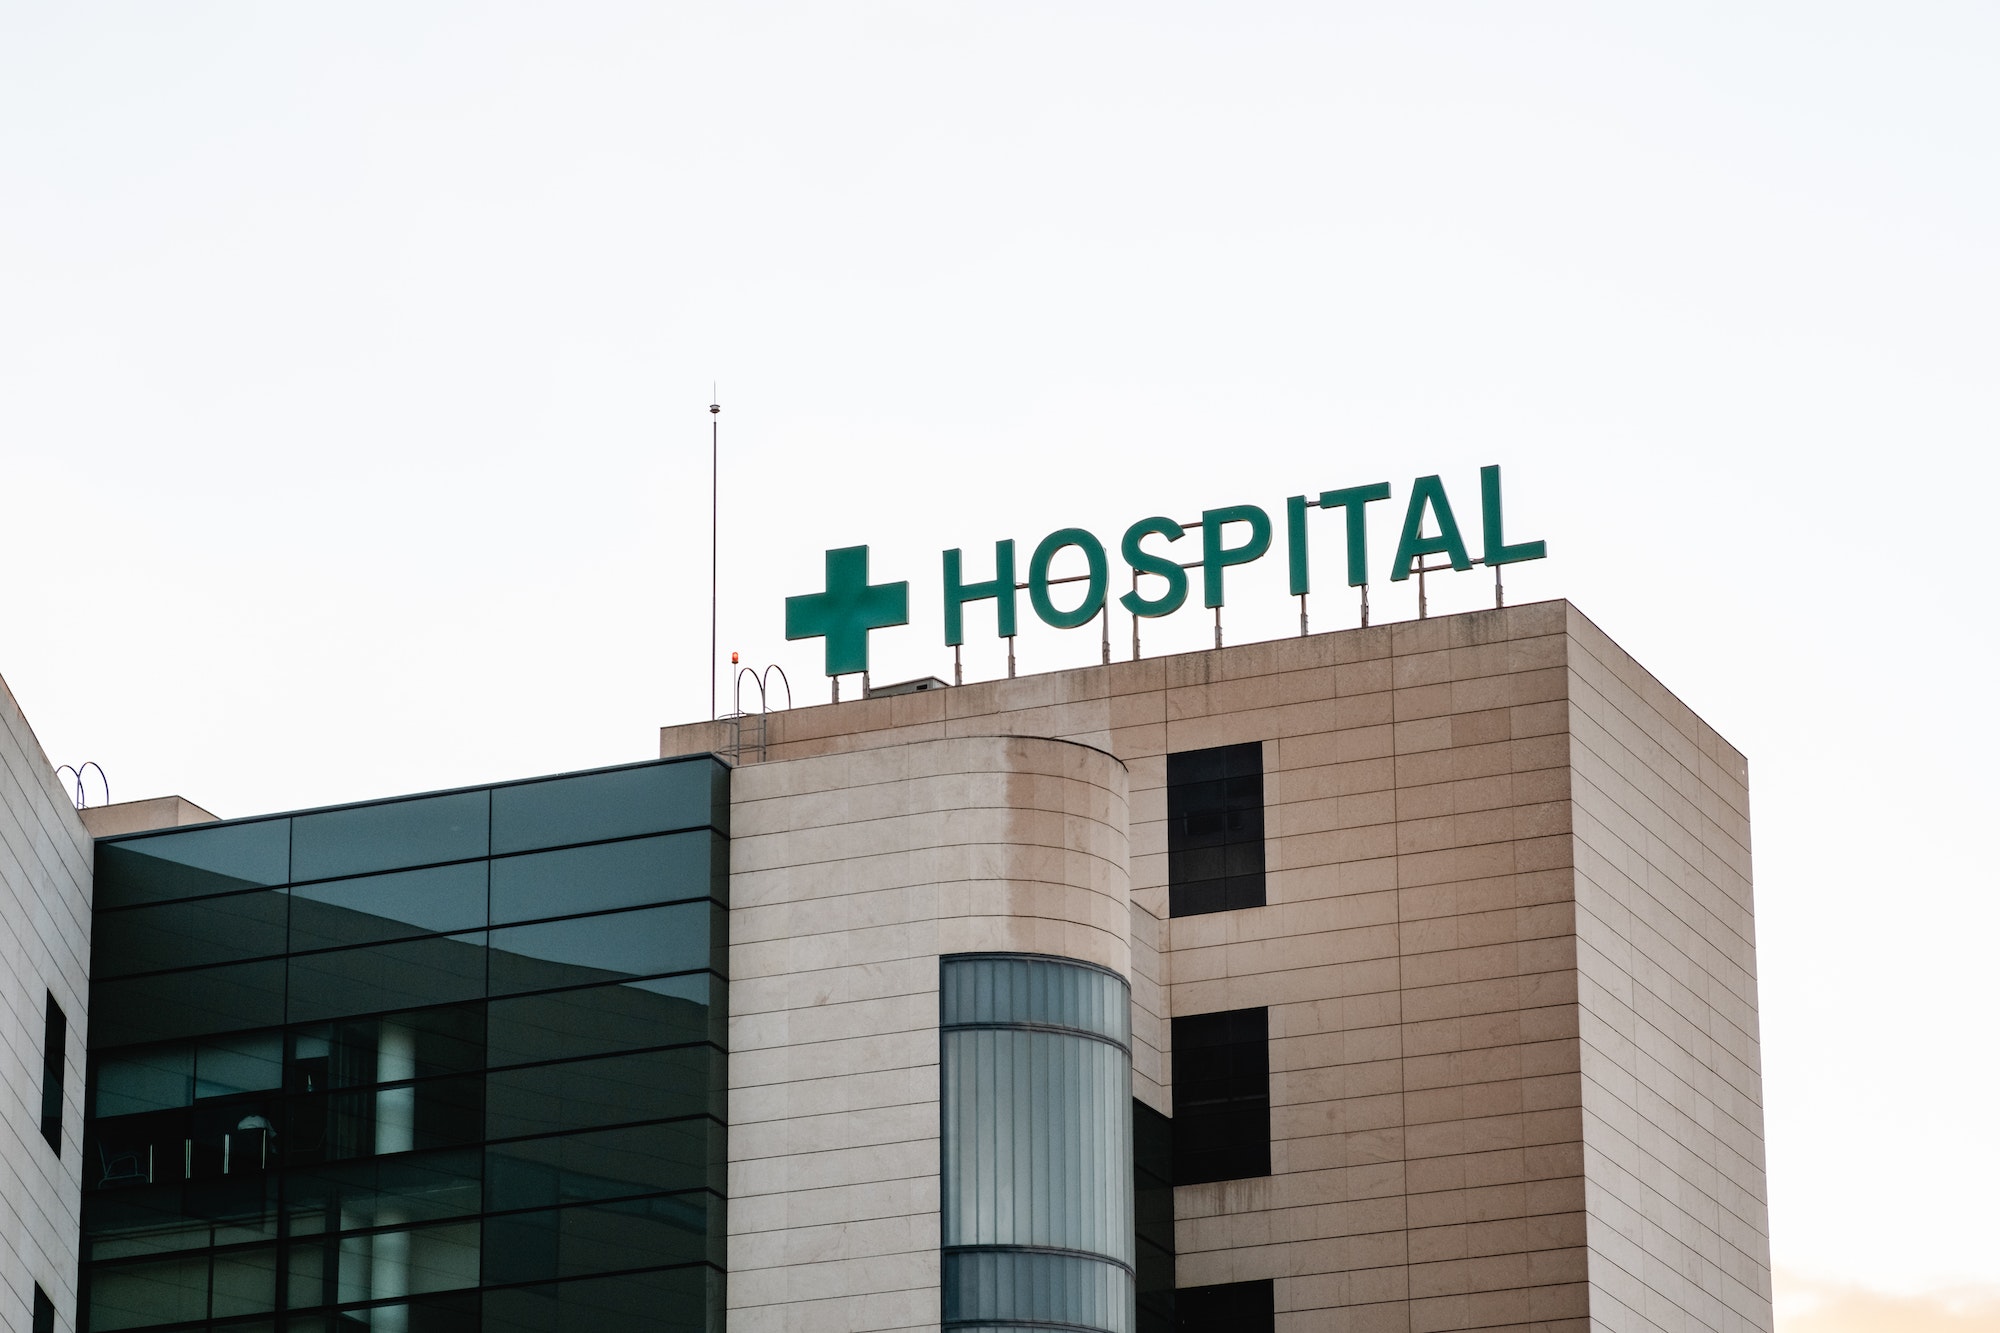 HOSPITAL sign in letters on the outside.